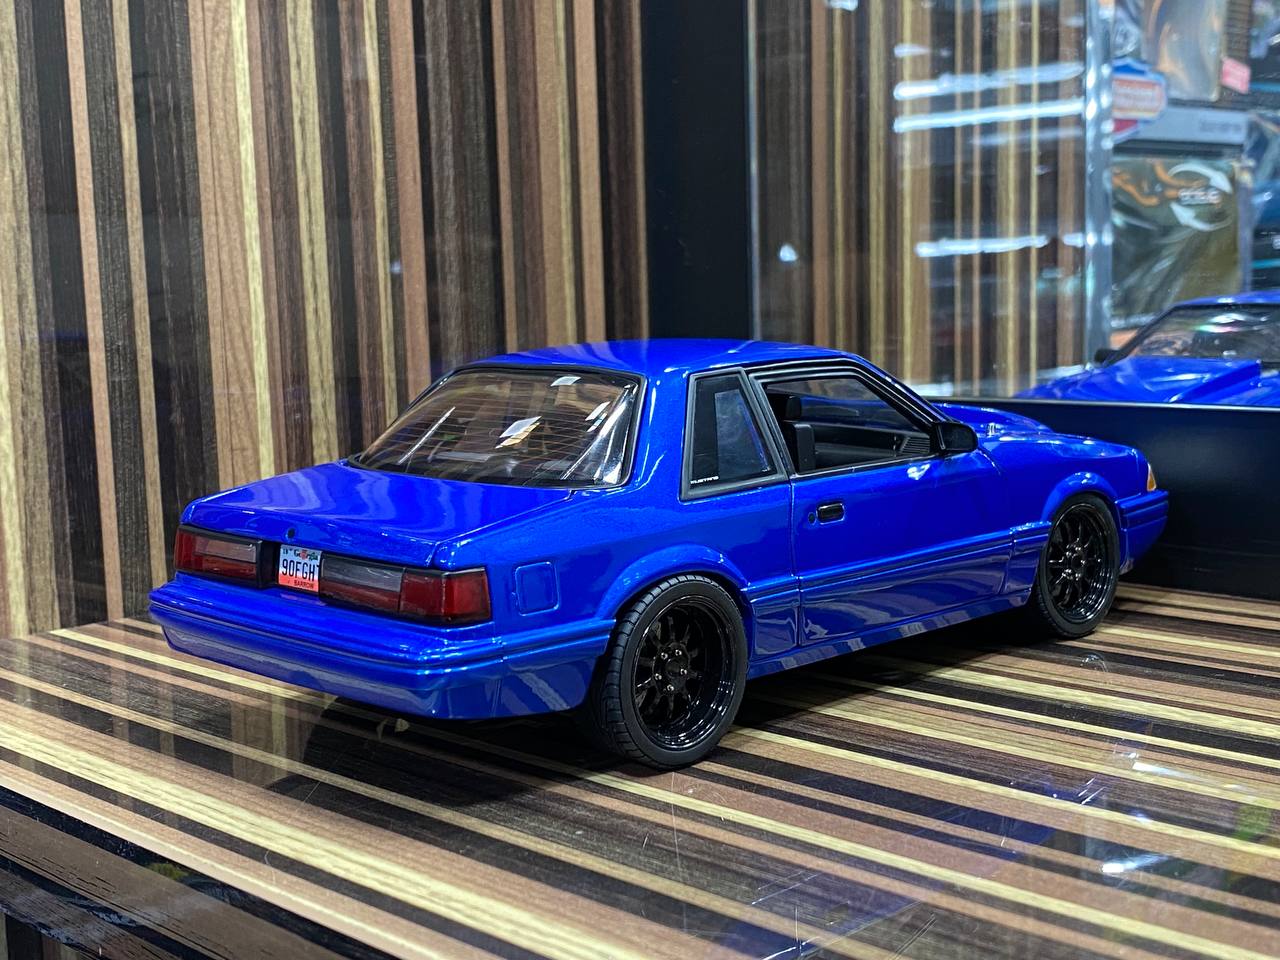 1/18 Ford Mustang 1990 blue by GMP Model Car|Sold in Dturman.com Dubai UAE.